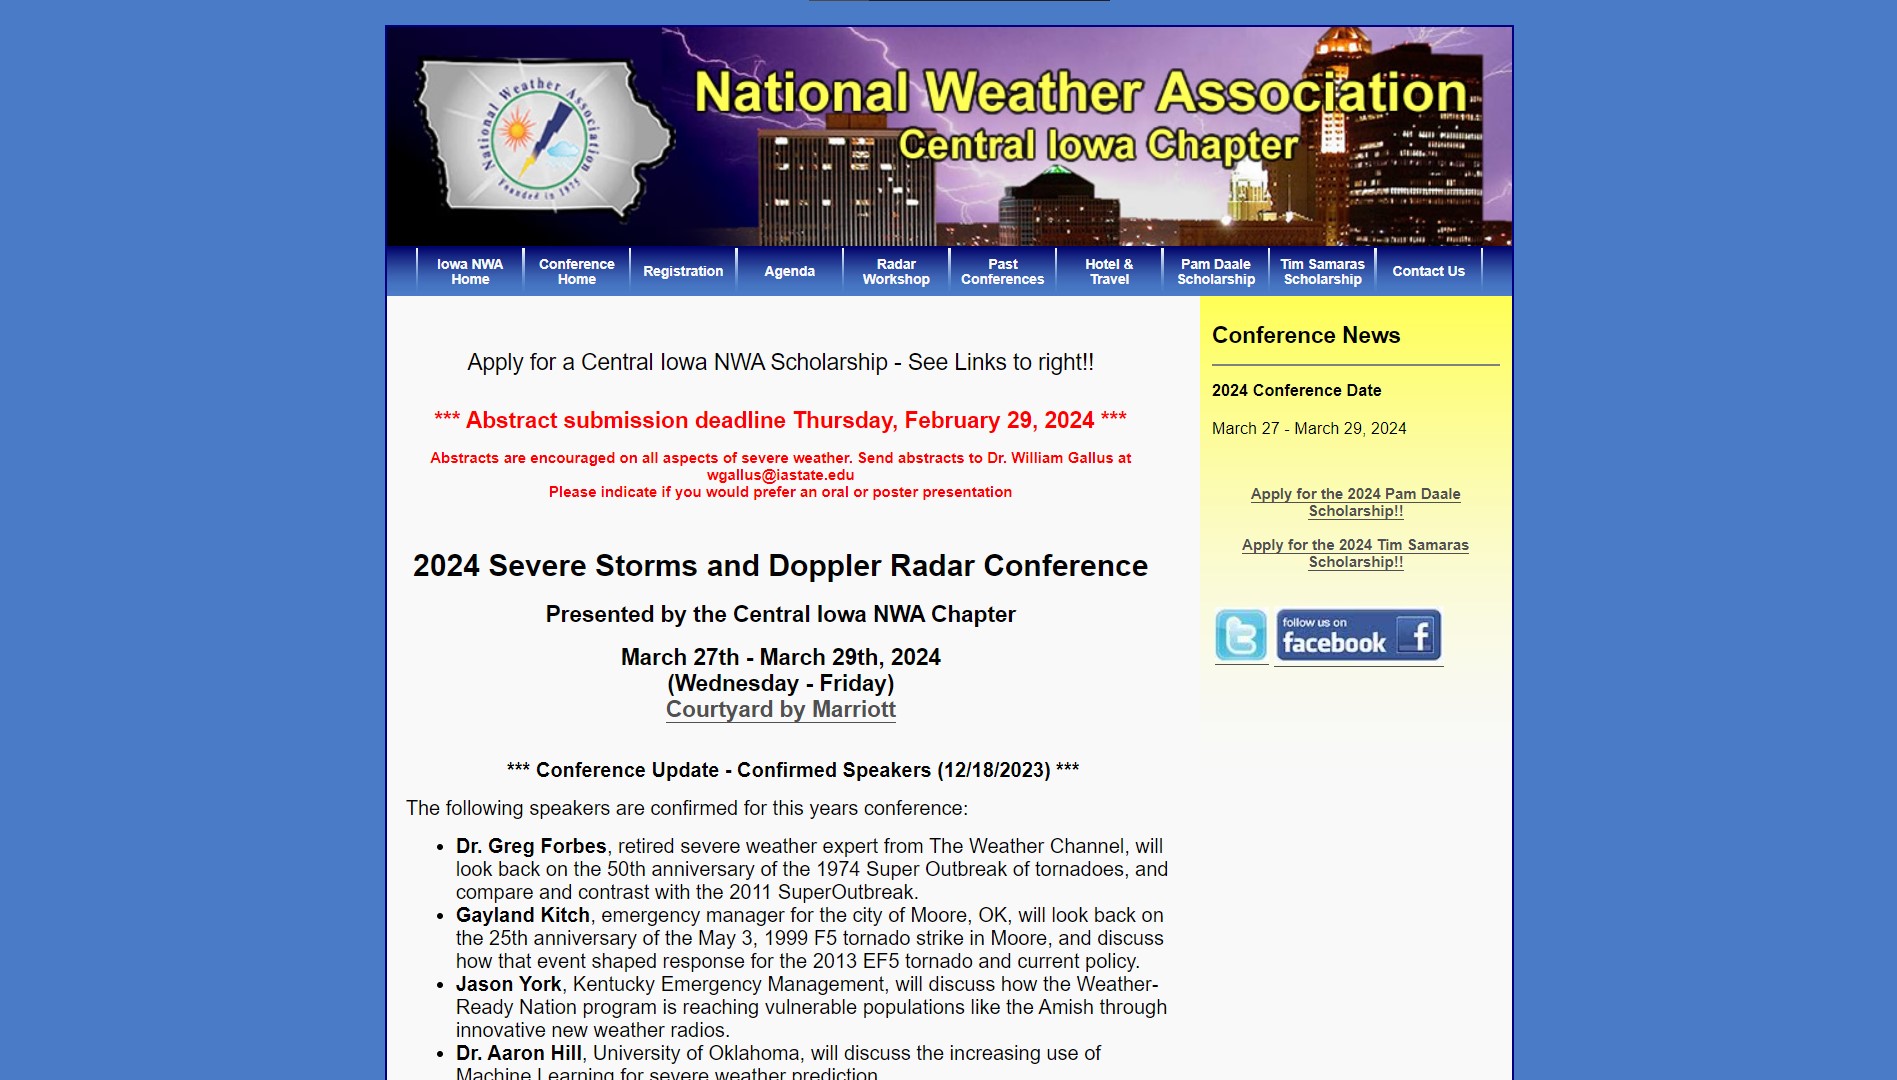 2024 Central Iowa Severe Storms and Doppler Radar Conference